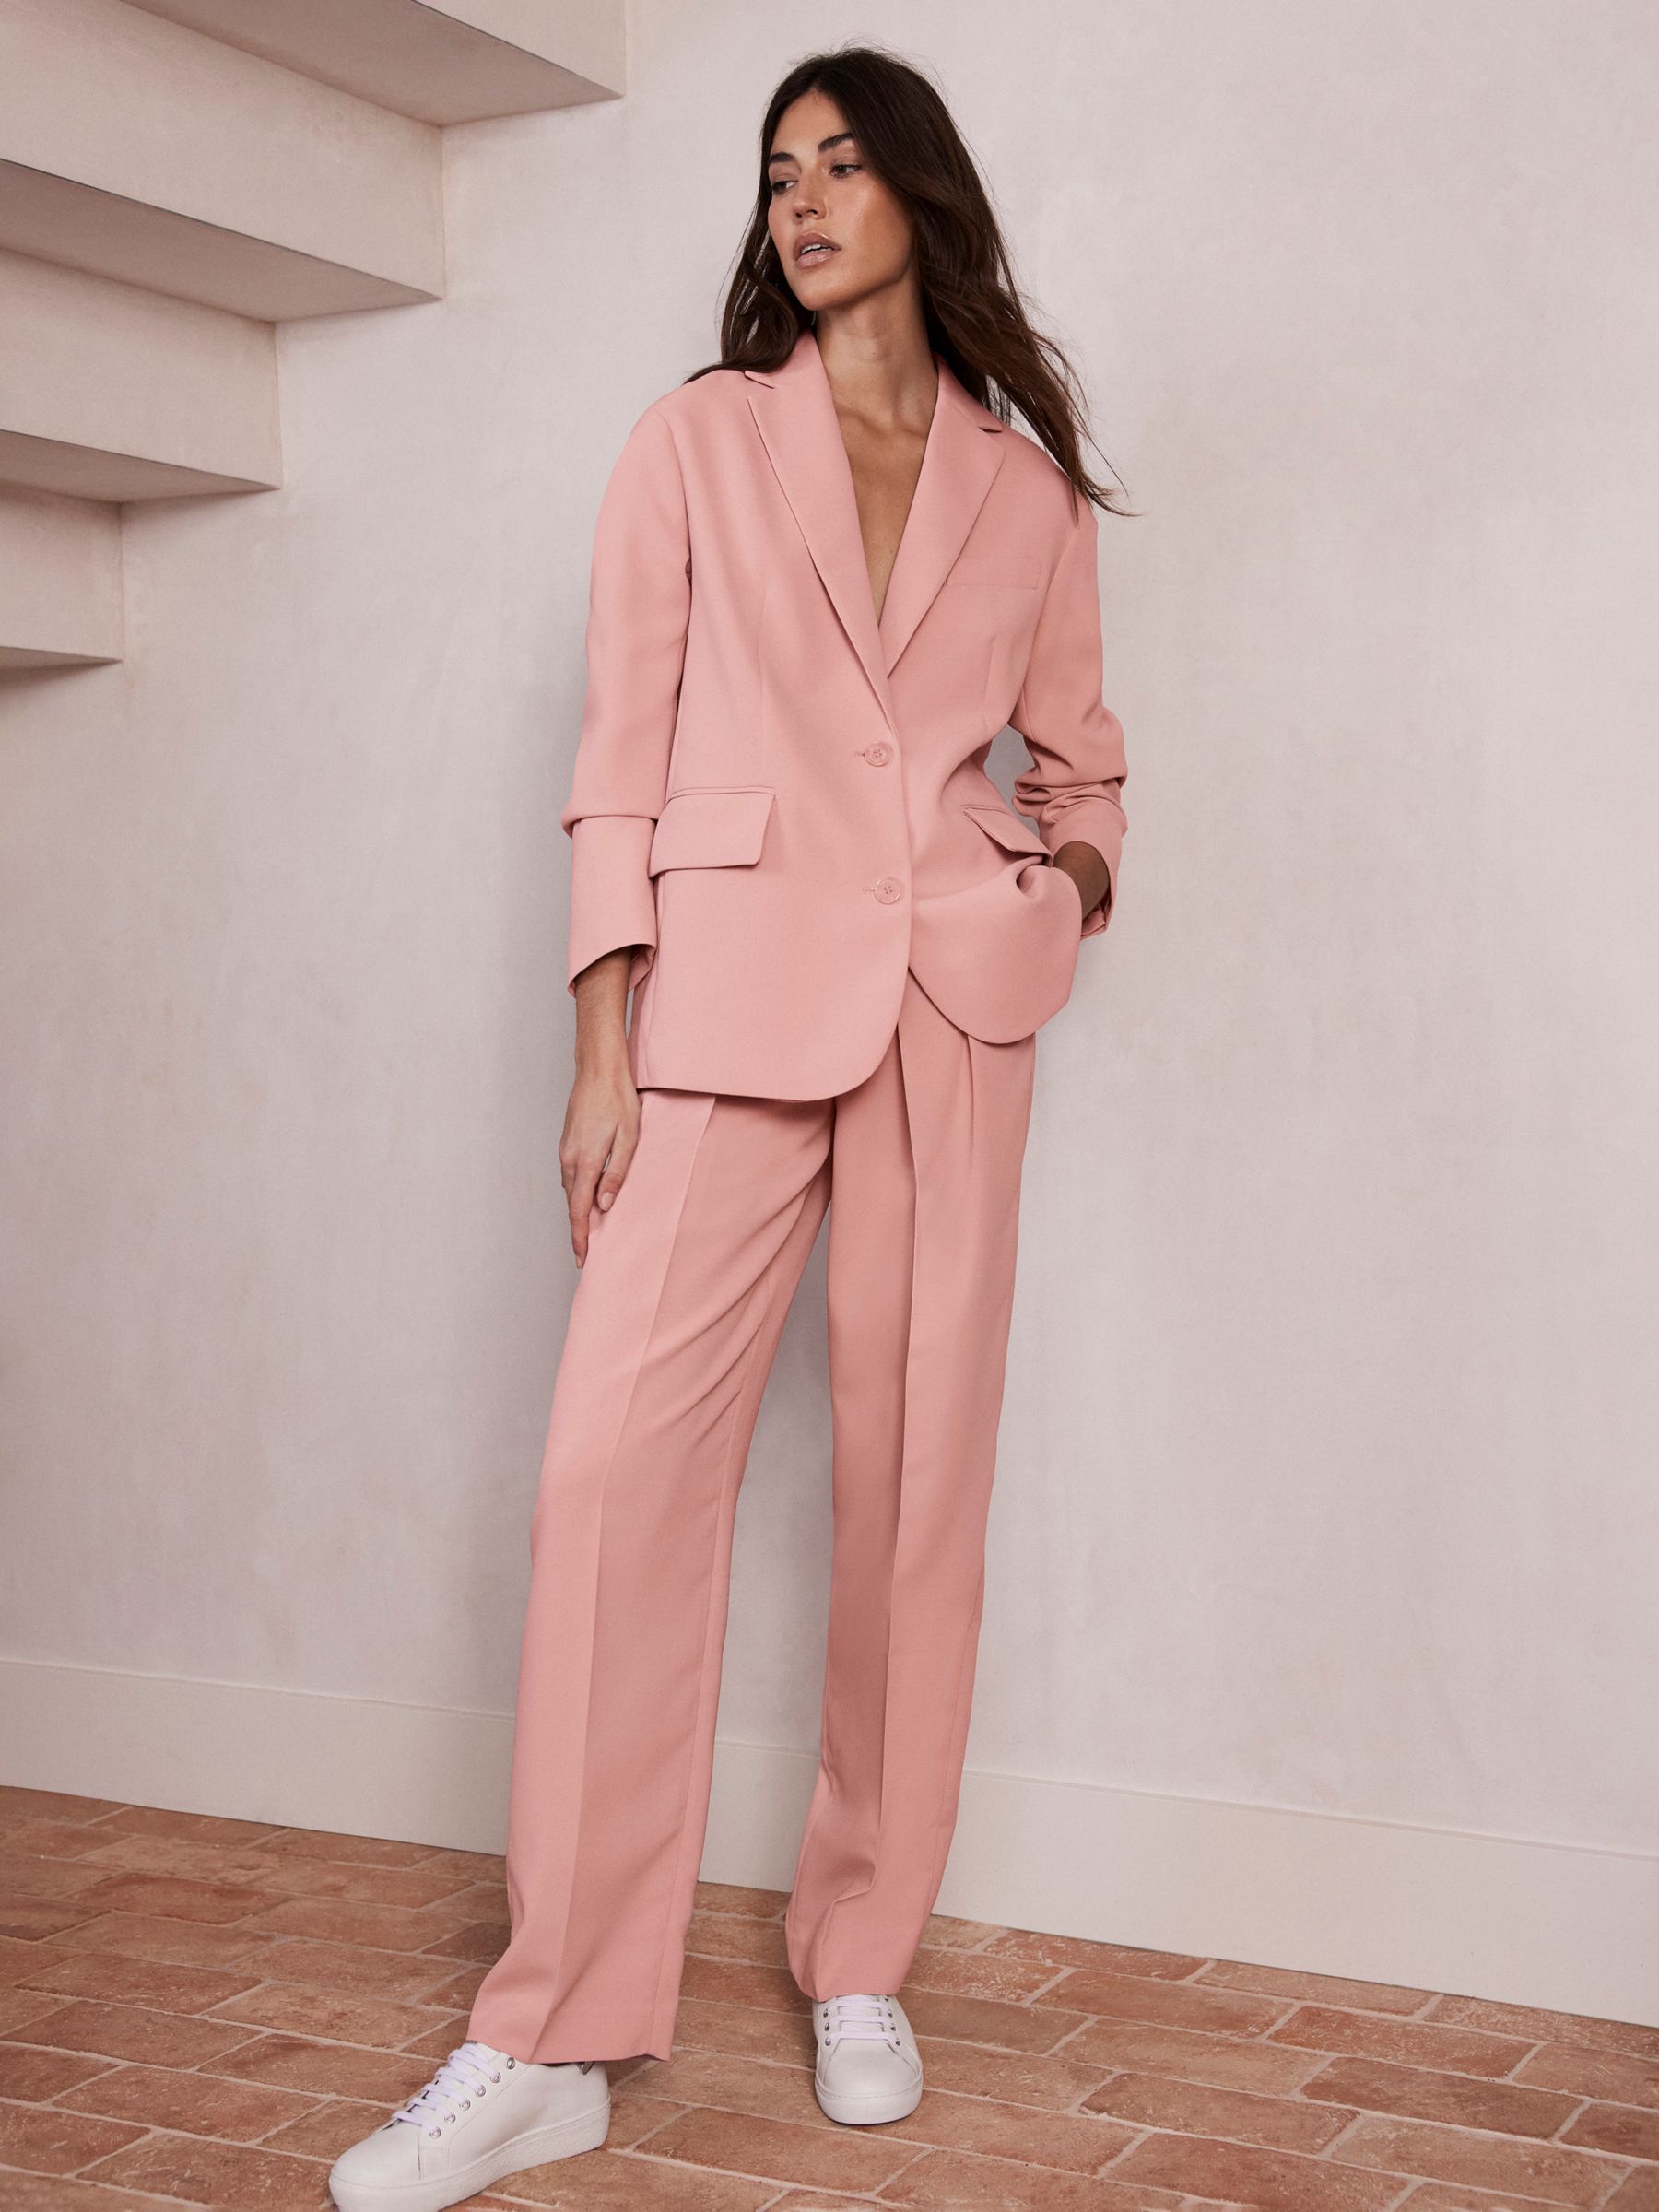 Buy Mint Velvet Tailored Wide Leg Pleat Front Trousers, Pink Online at johnlewis.com